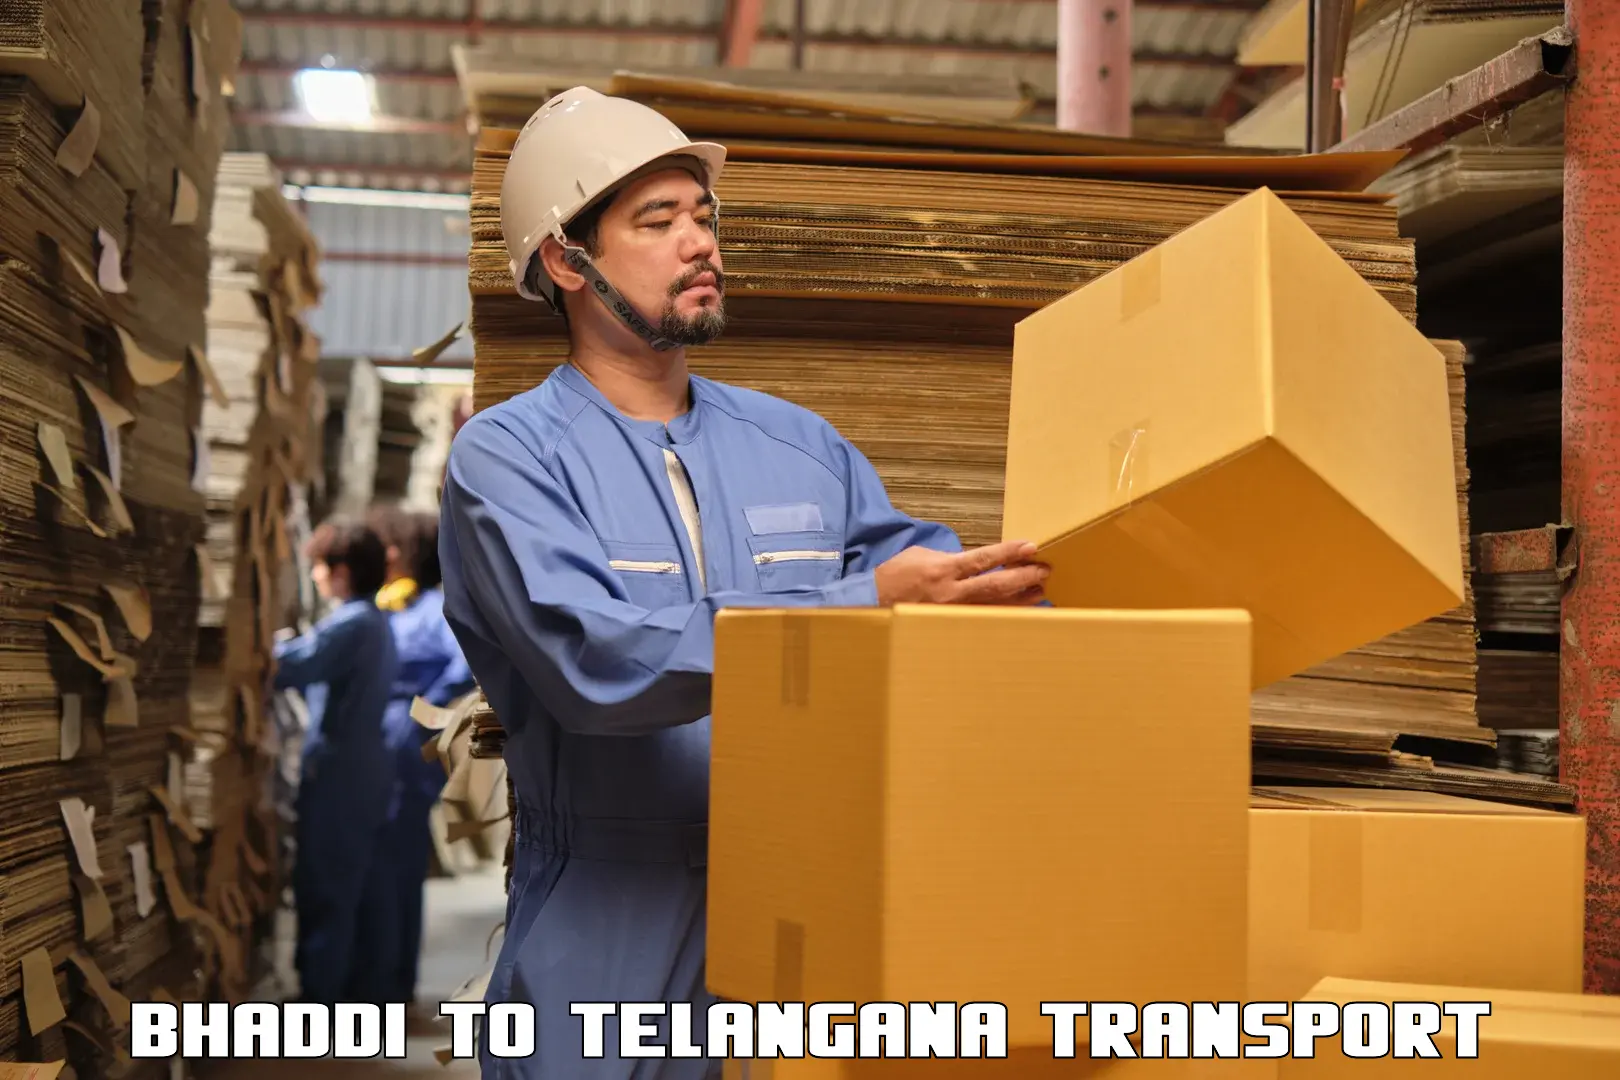 Air freight transport services Bhaddi to Manneguda